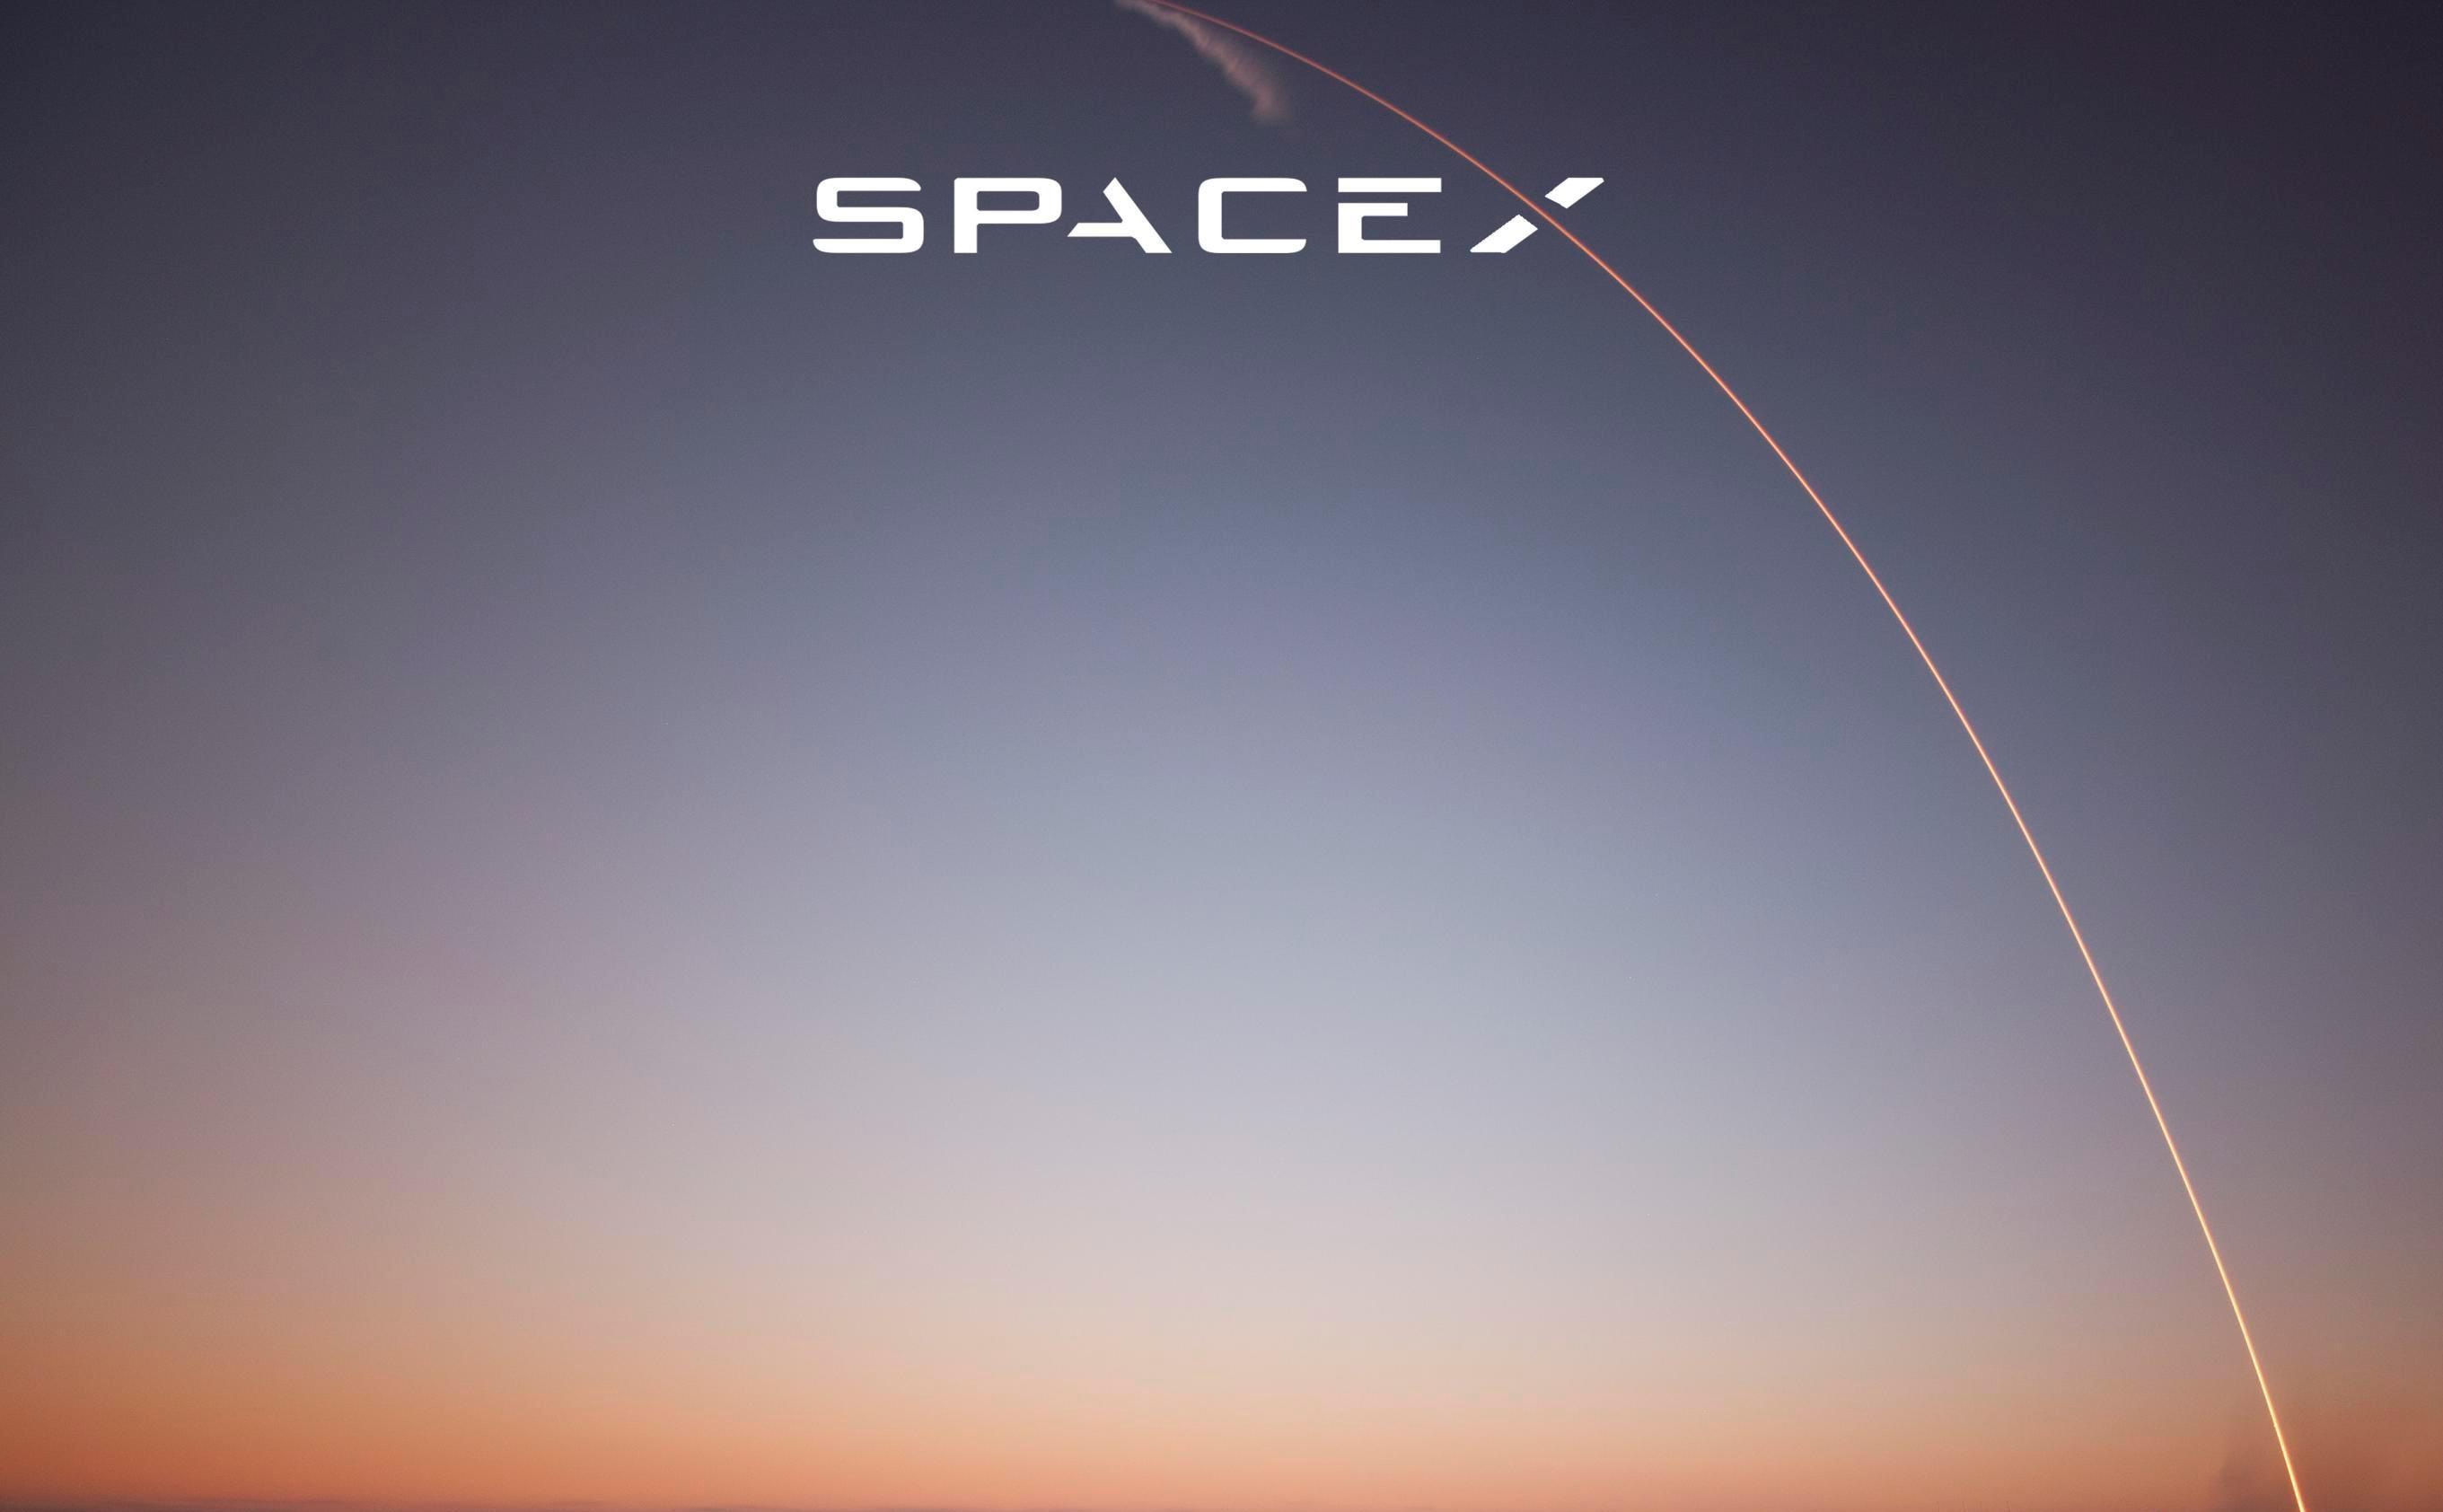 Spacex Wallpapers Wallpaper Cave